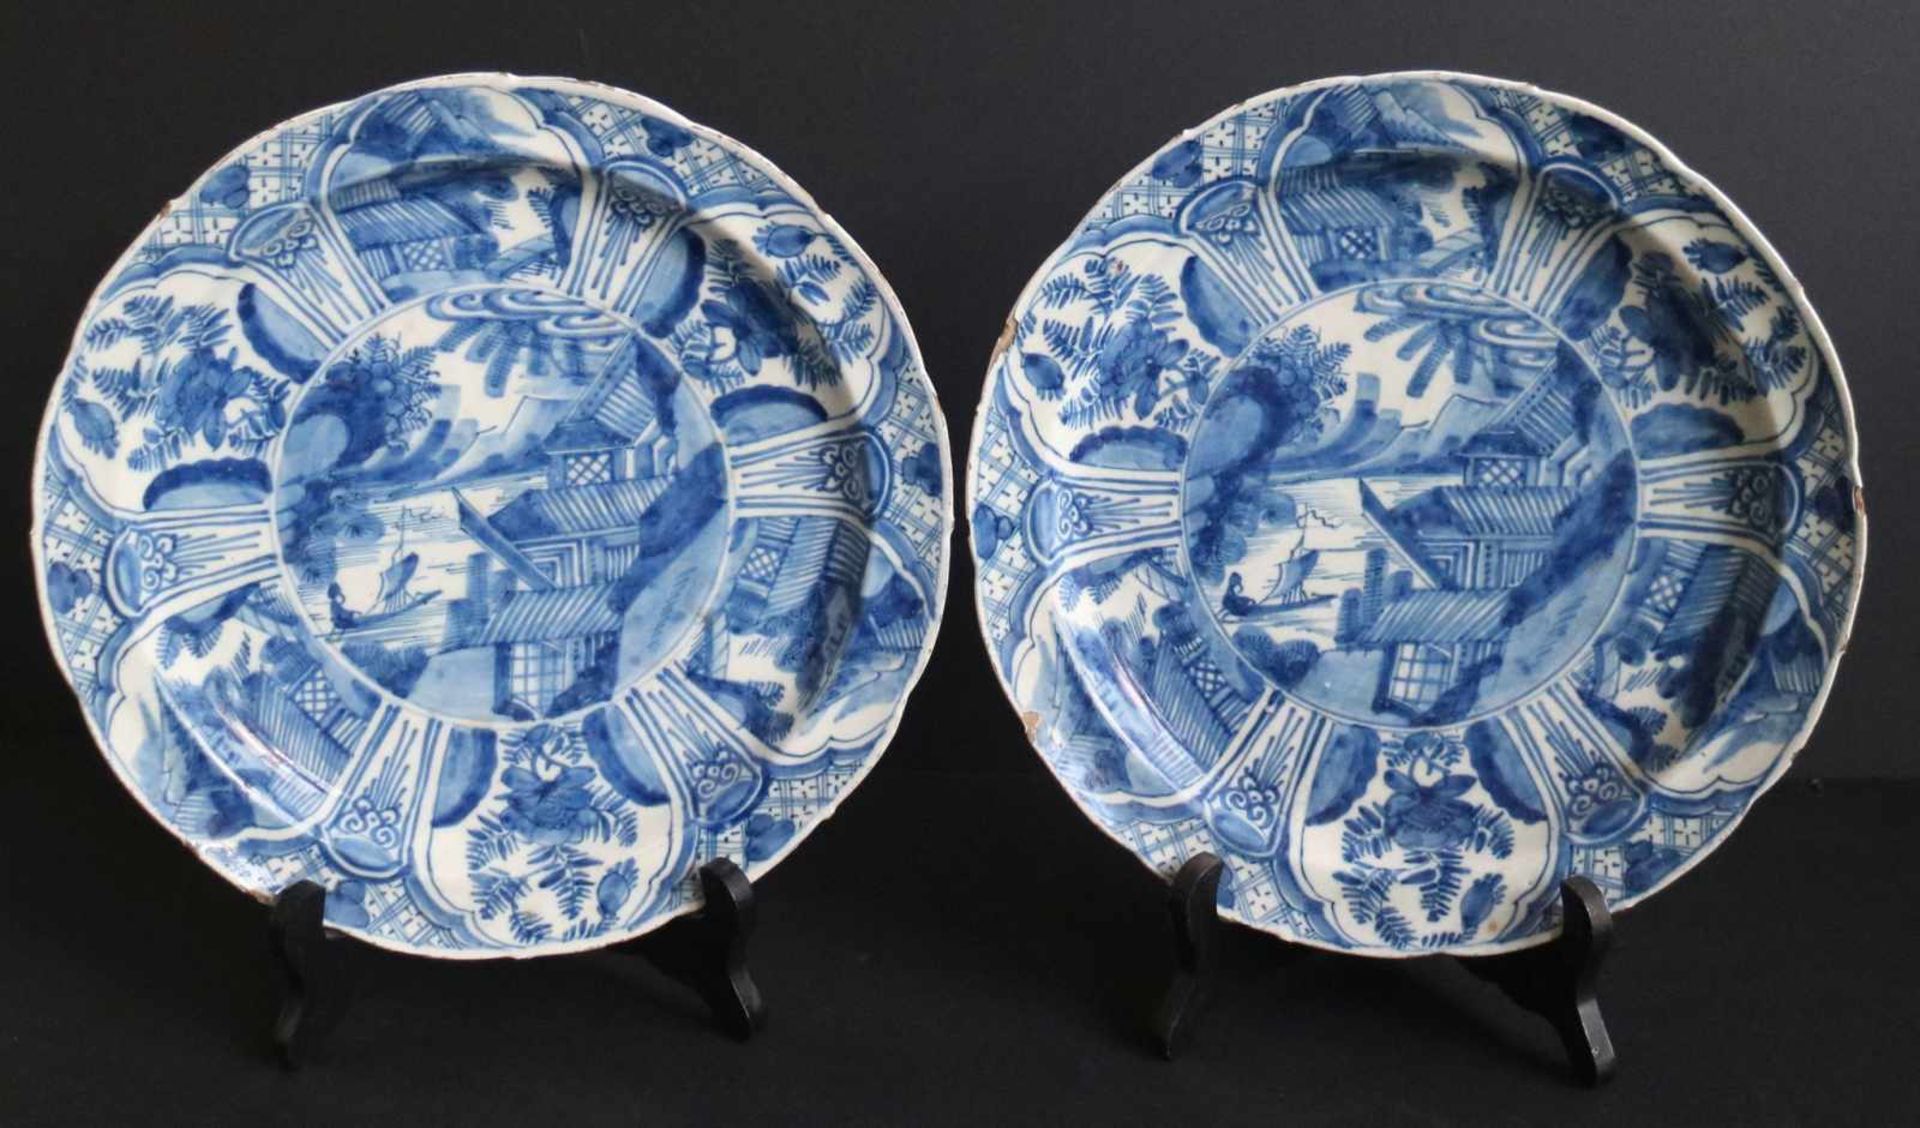 DELFT Van Eenhoorn2 plates with chinoiserie Marked VE, factory De Griekse A Late 17th early 18th